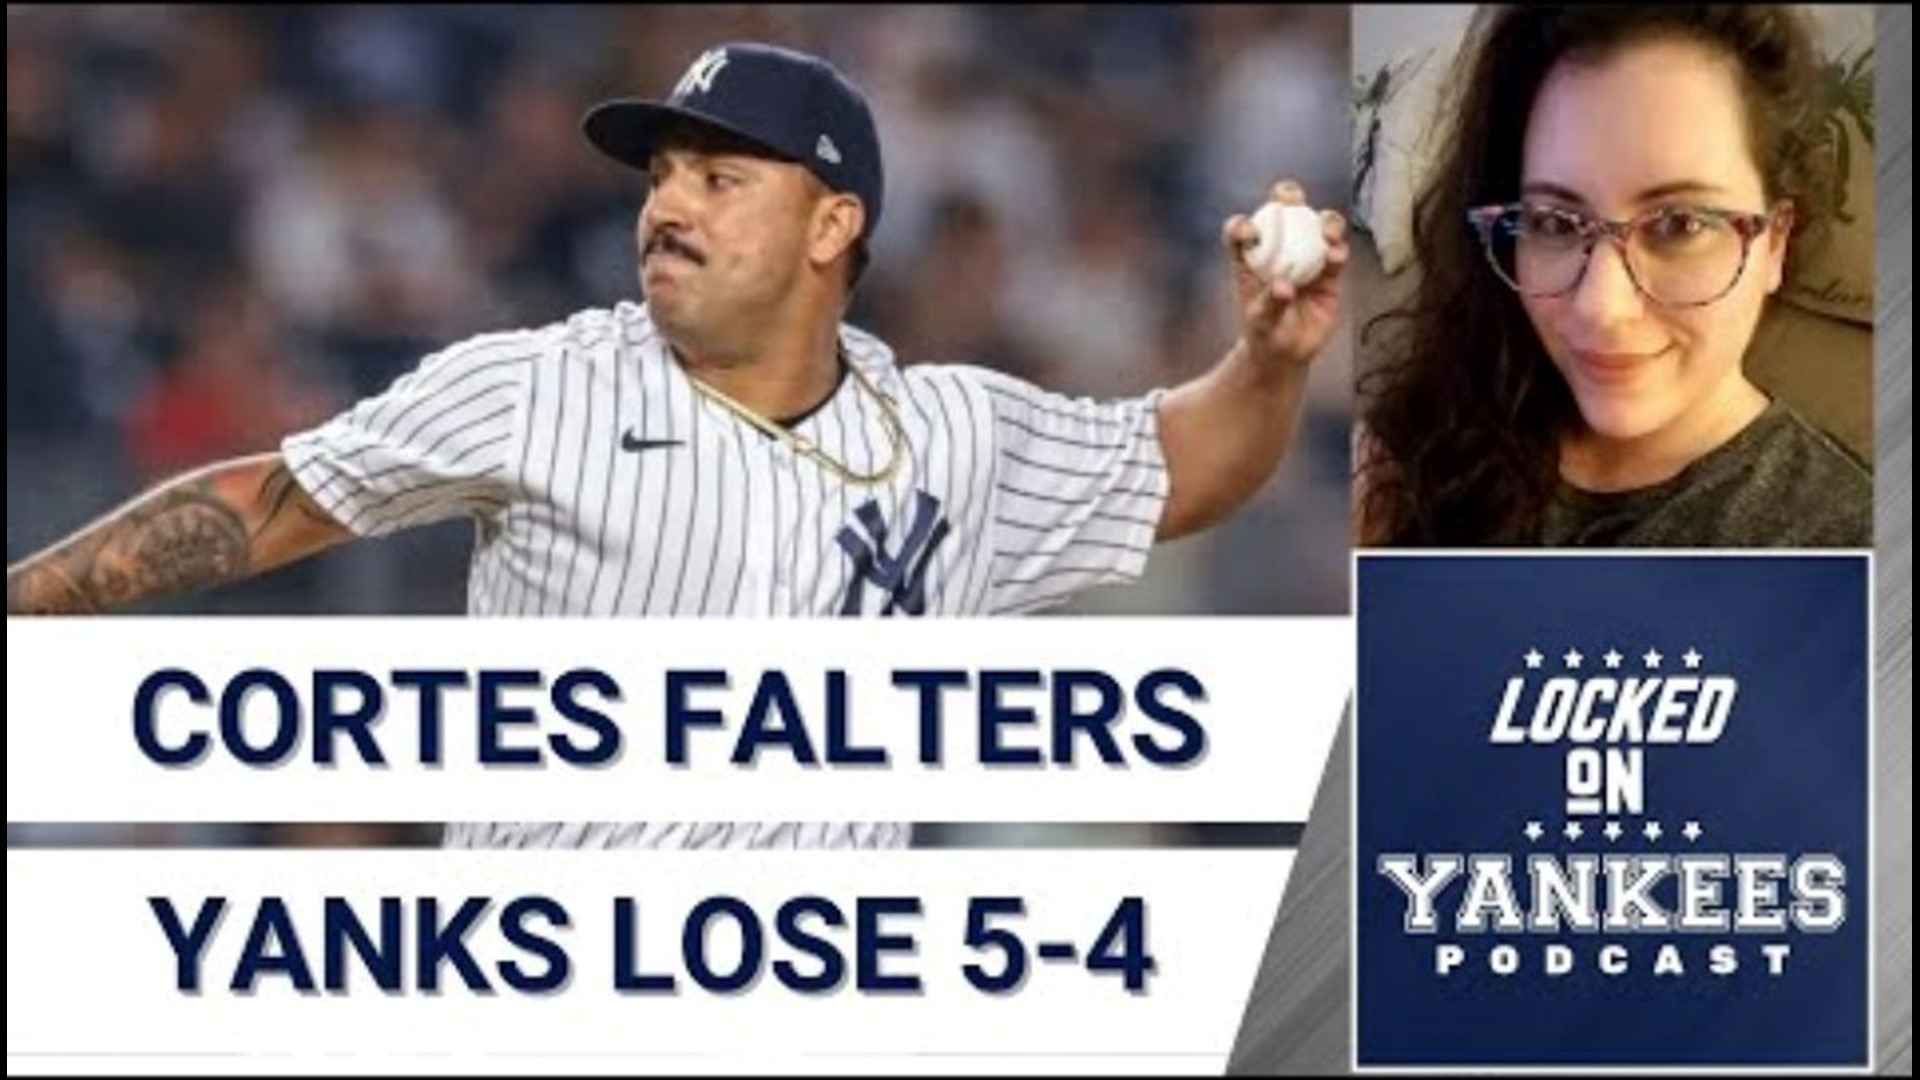 Nestor Cortes had a bit of a rough outing against the Rays. Plus a preview of Wednesday night's matchup in the series finale on Locked On Yankees.